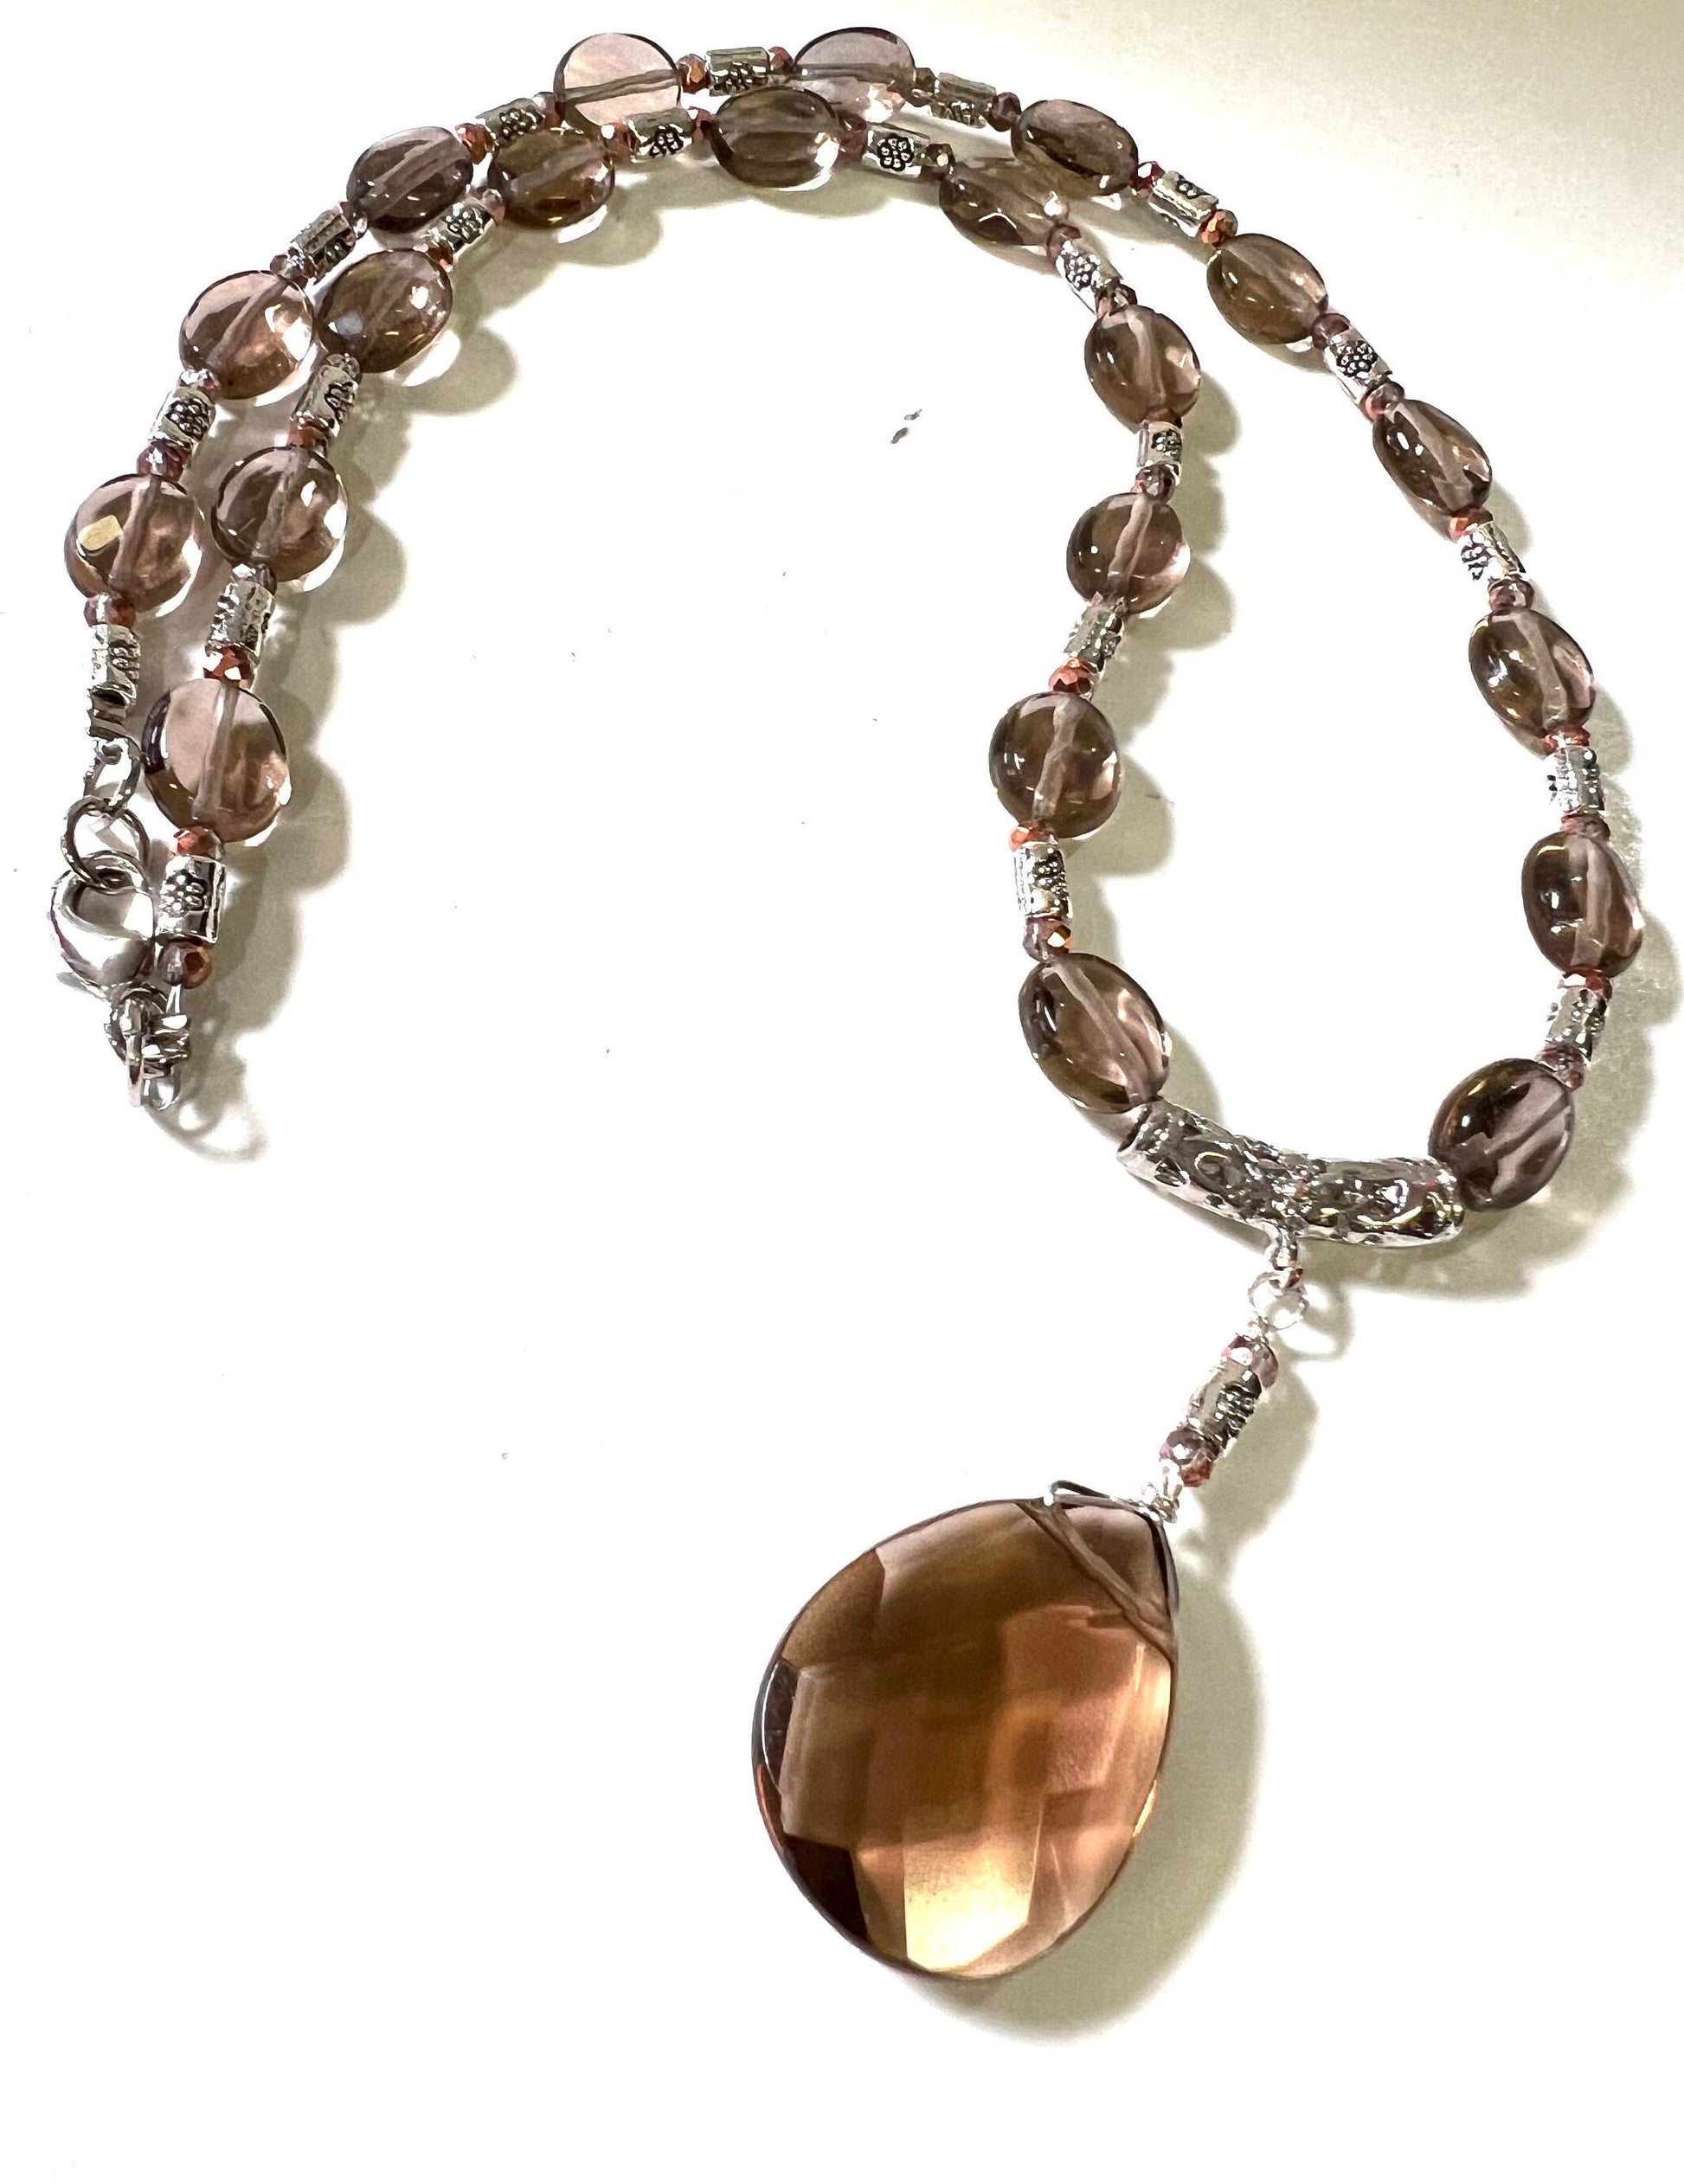 Genuine Smokey Quartz Necklace Faceted Oval 10x14mm Bali spacer dangling faceted large Drop Gemstone Silver handmade necklace.